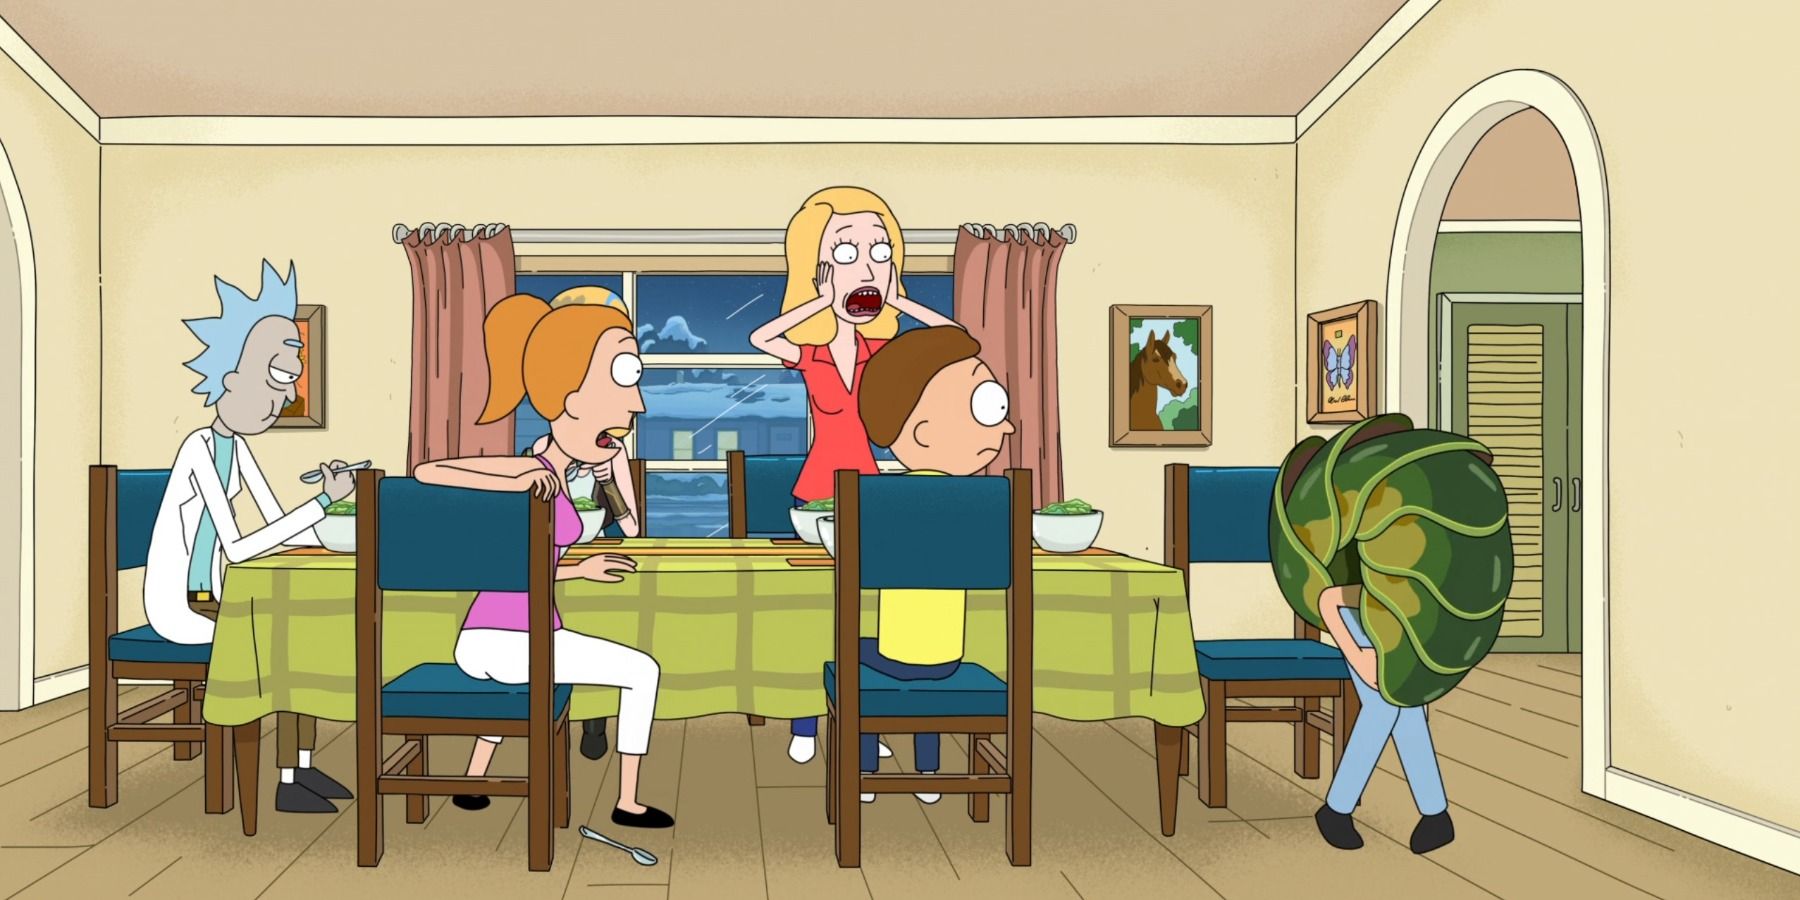 Jerry rolls into pill bug Rick and Morty thanksgiving dinner